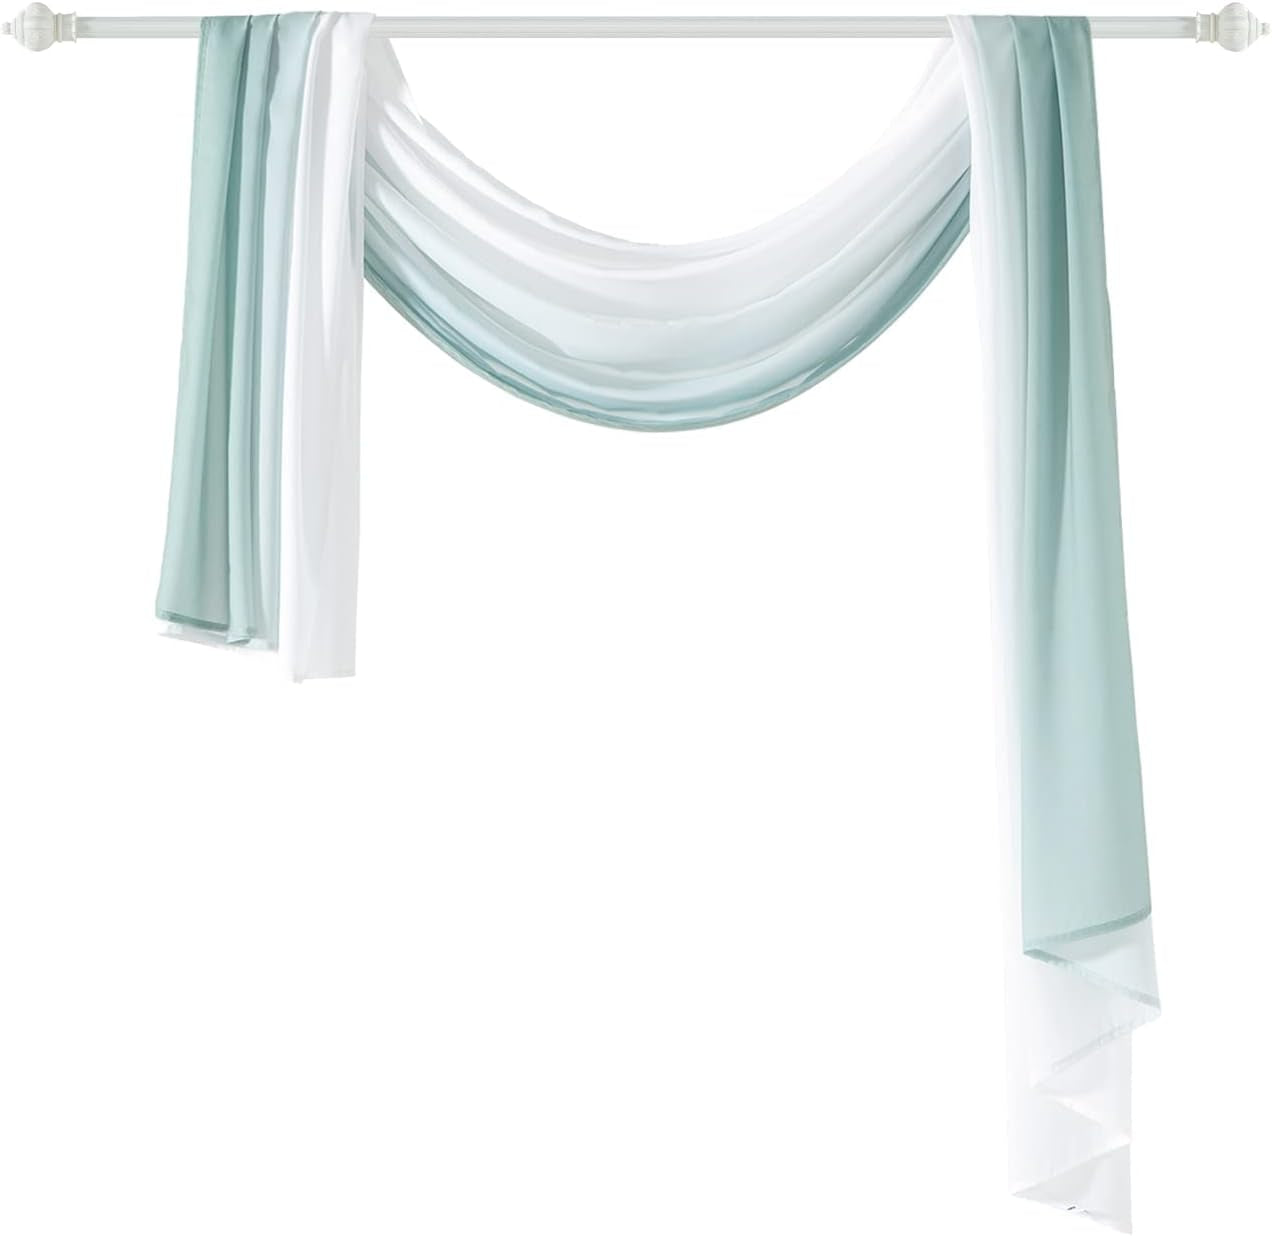 NAPEARL Ombre Window Scarf Valance, Romantic Gradient Voile Scarf Valance for Ceremony Backdrop, Wedding Arch, Kids Bedroom, Decorative Swag Curtain 216 Inches, Grey